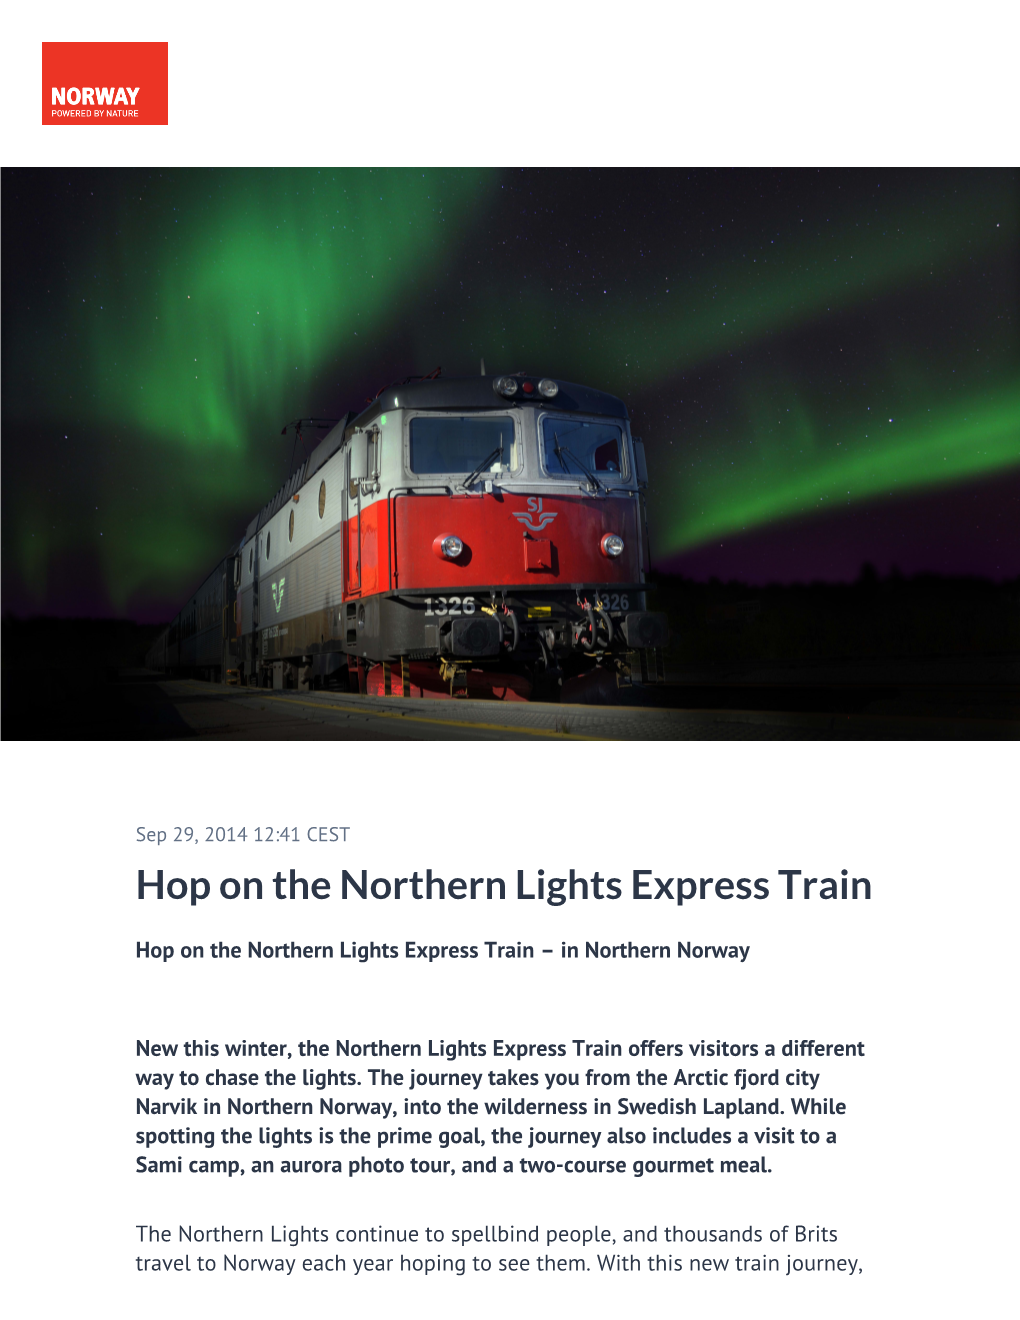 Hop on the Northern Lights Express Train